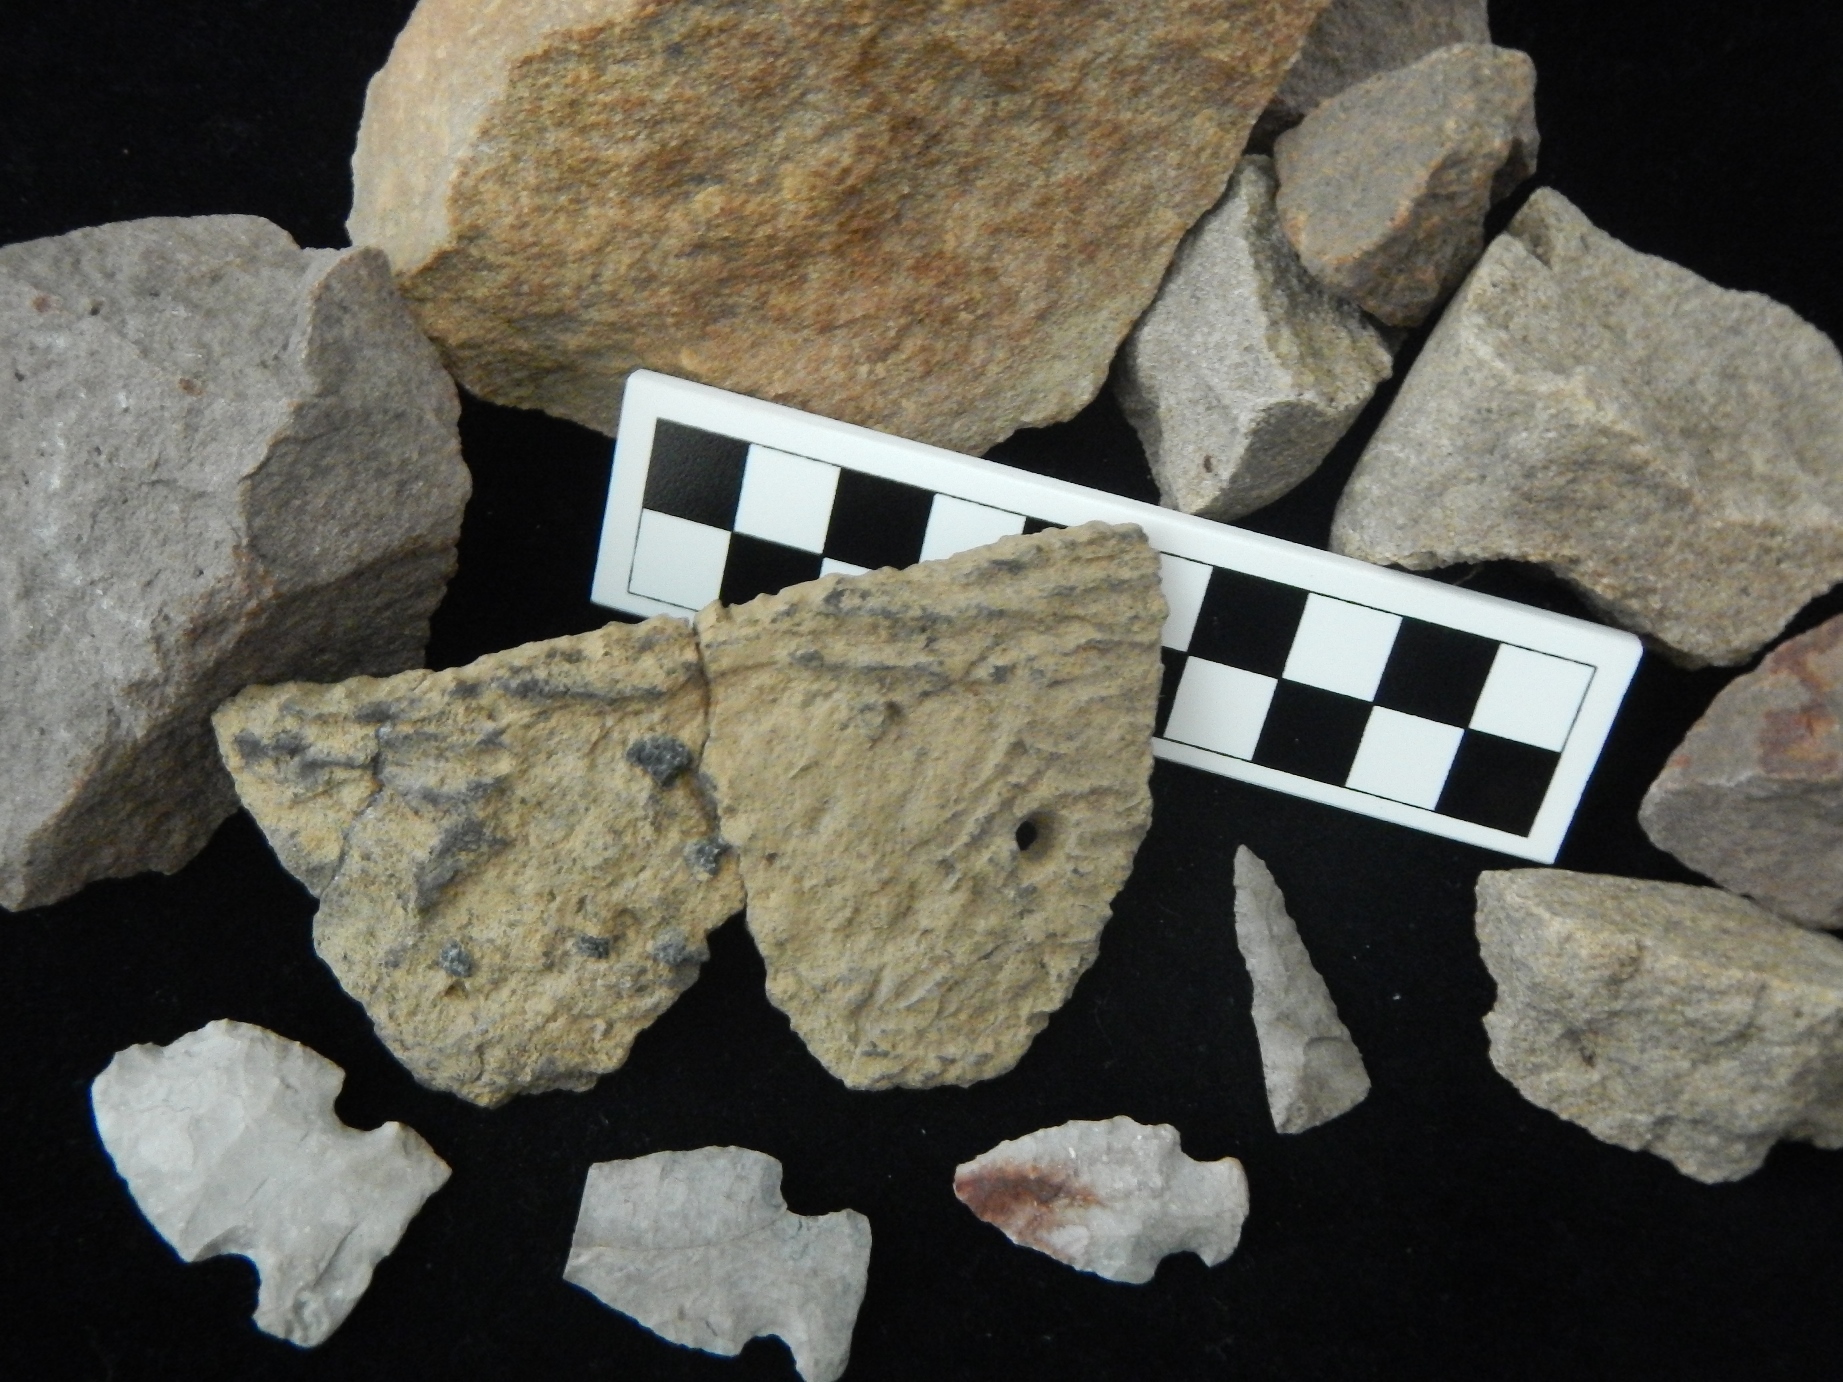 Artifacts recovered at the Sanilac Petroglyphs Historic State Park, including fire-cracked rock from hearths, refitted pieces of decorated pottery and